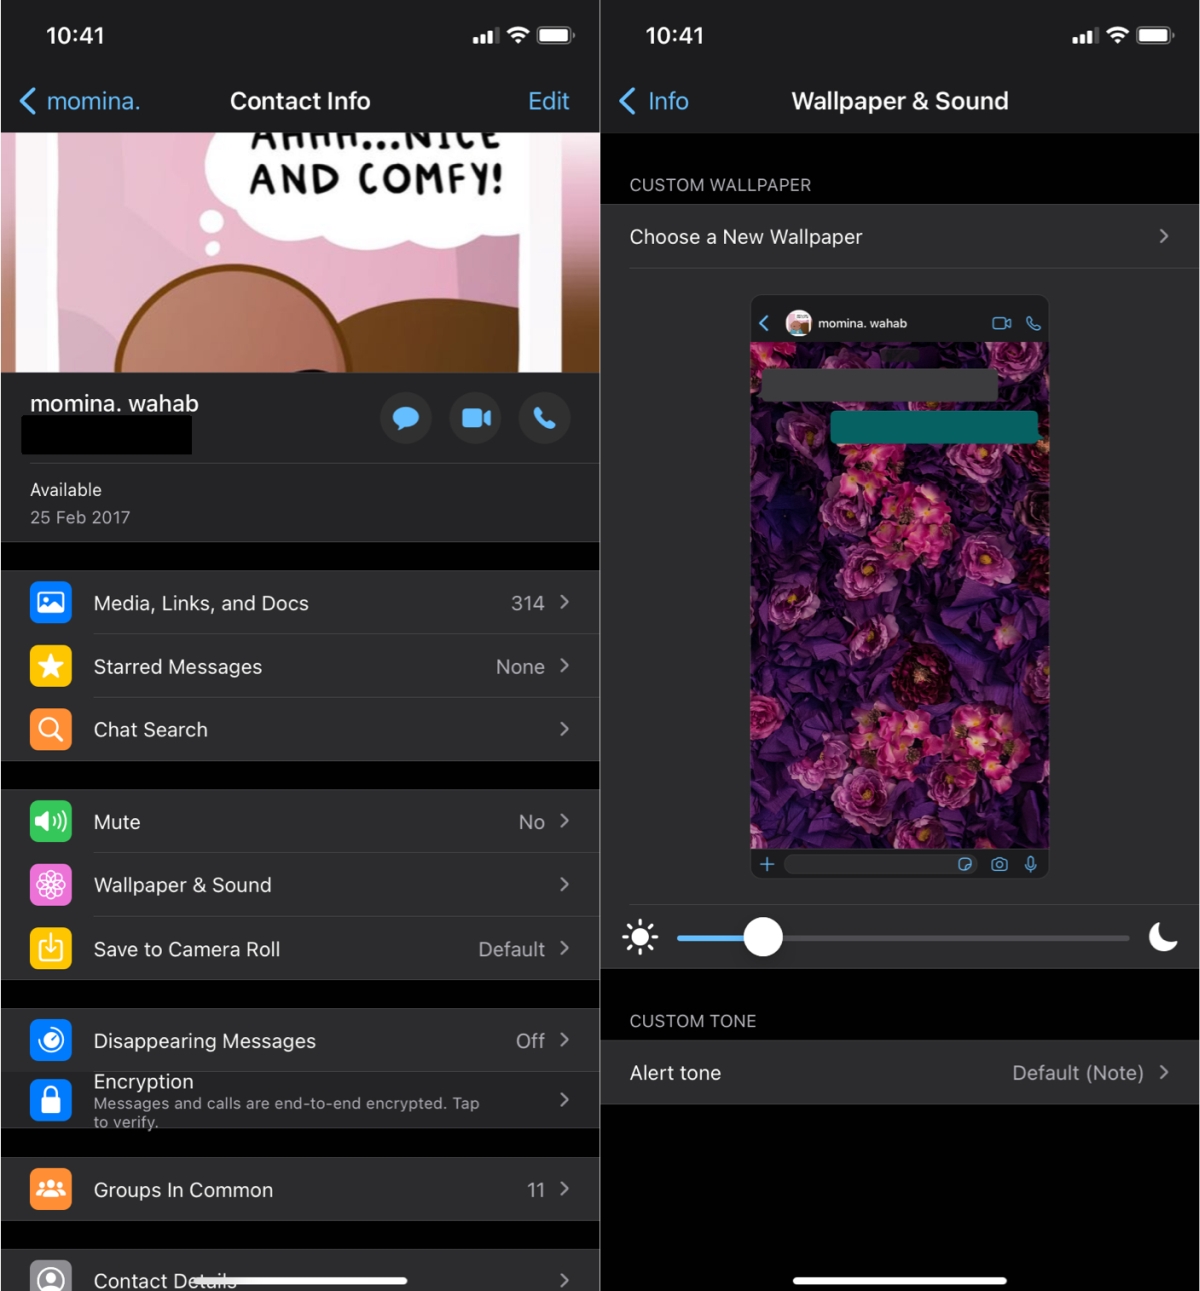 Let's share whatsapp dark mode chats backgrounds, here my contributions : r/ whatsapp